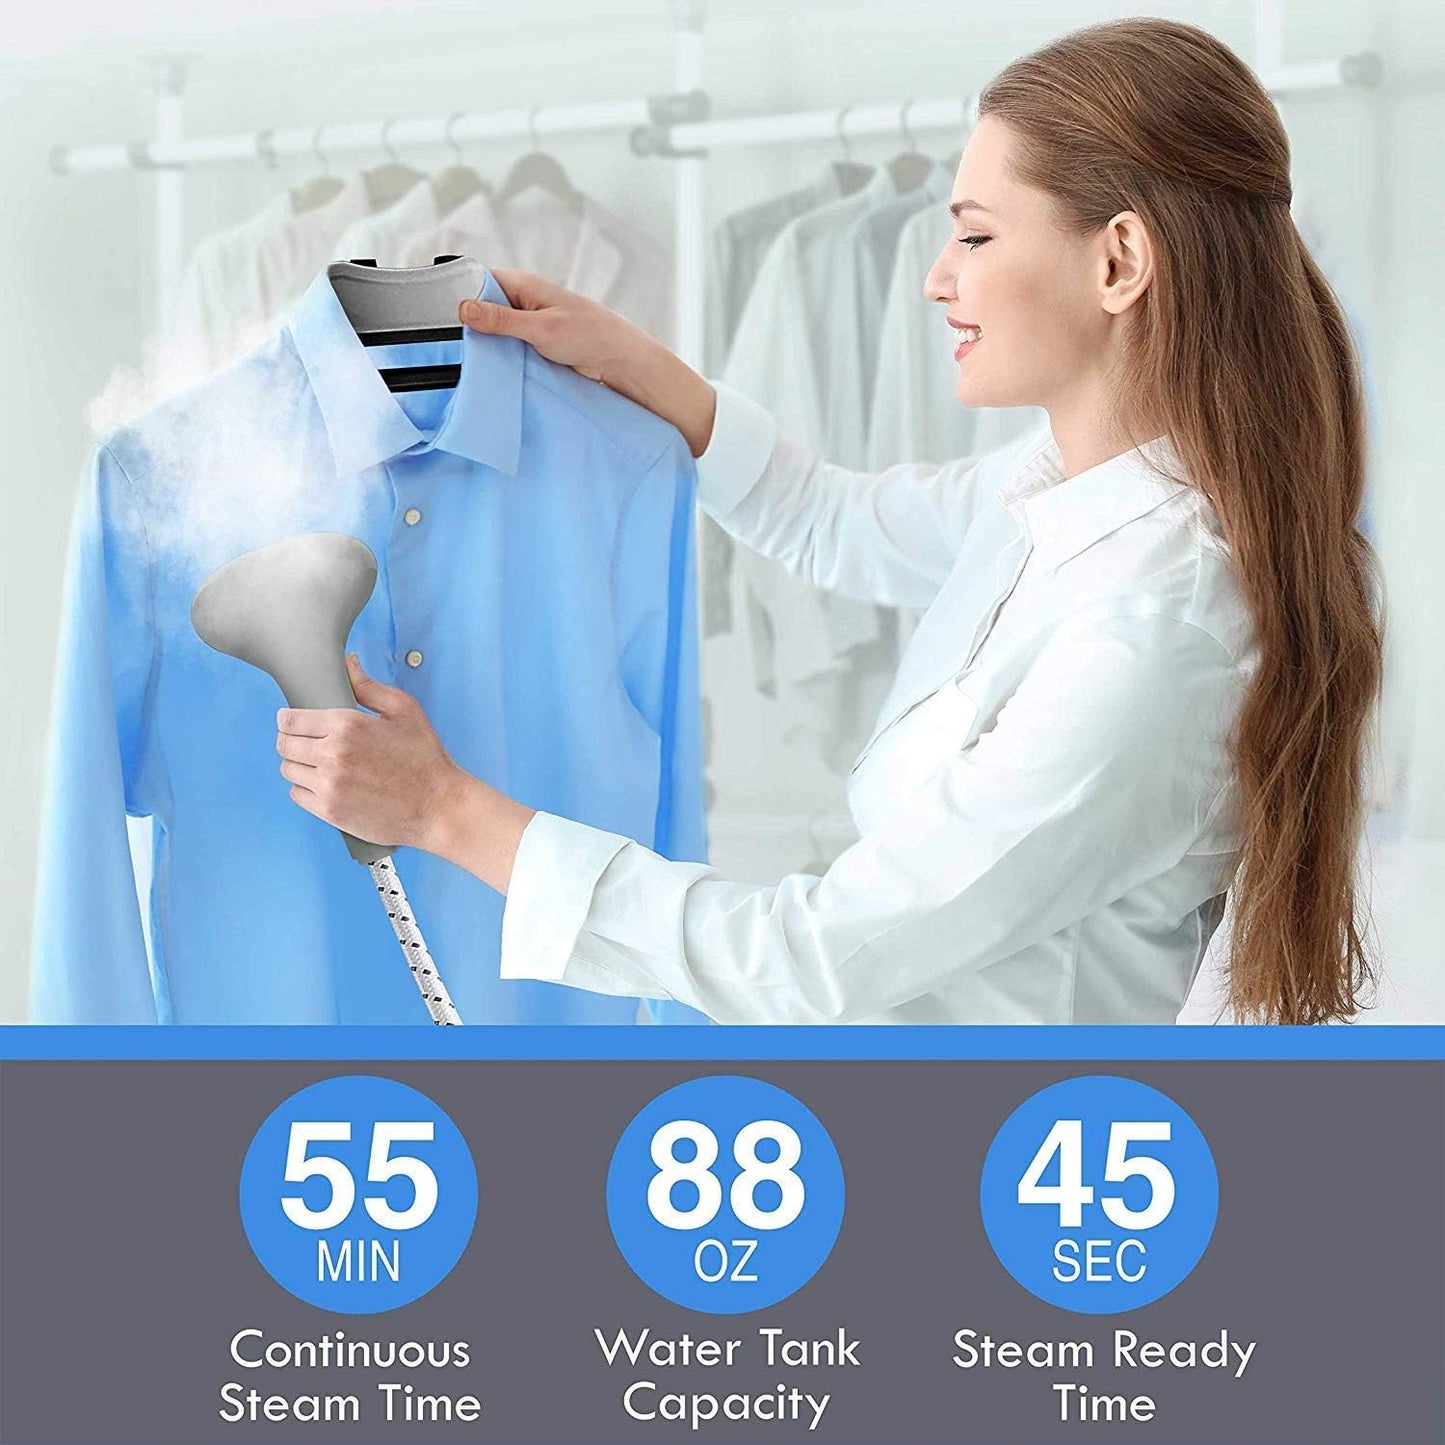 PurSteam Standing Garment Steamer with Wheels, 1h+ of Continuous Steam, Ironing Board